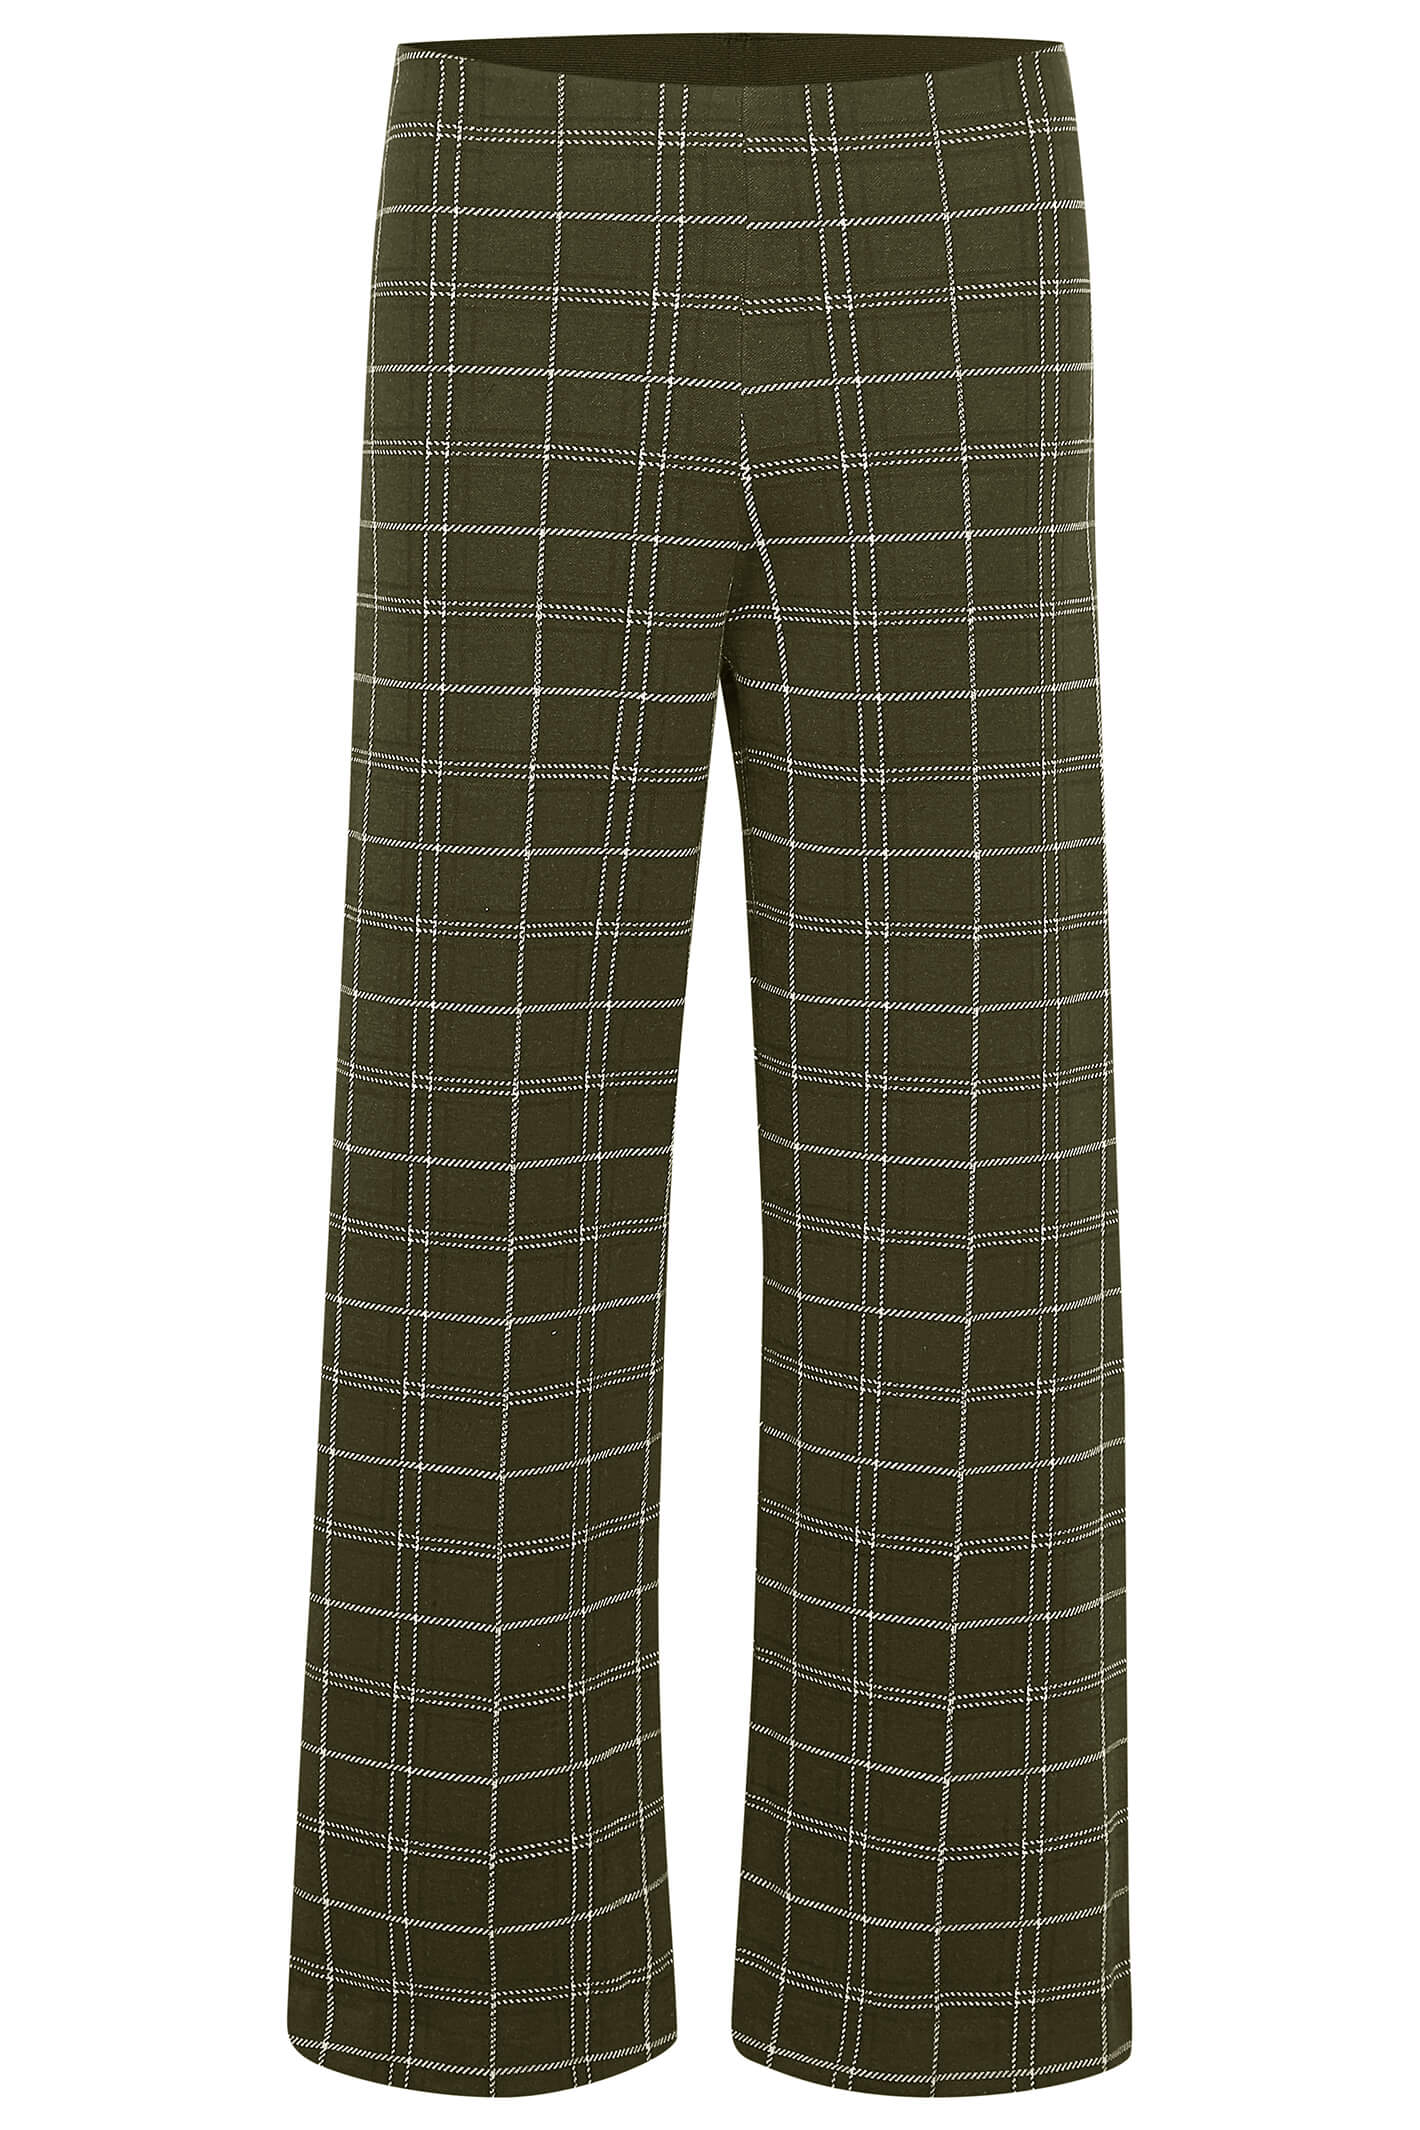 TYGE | Wide Cut Cropped Trousers | Multi Colour Check | HANSEN Garments